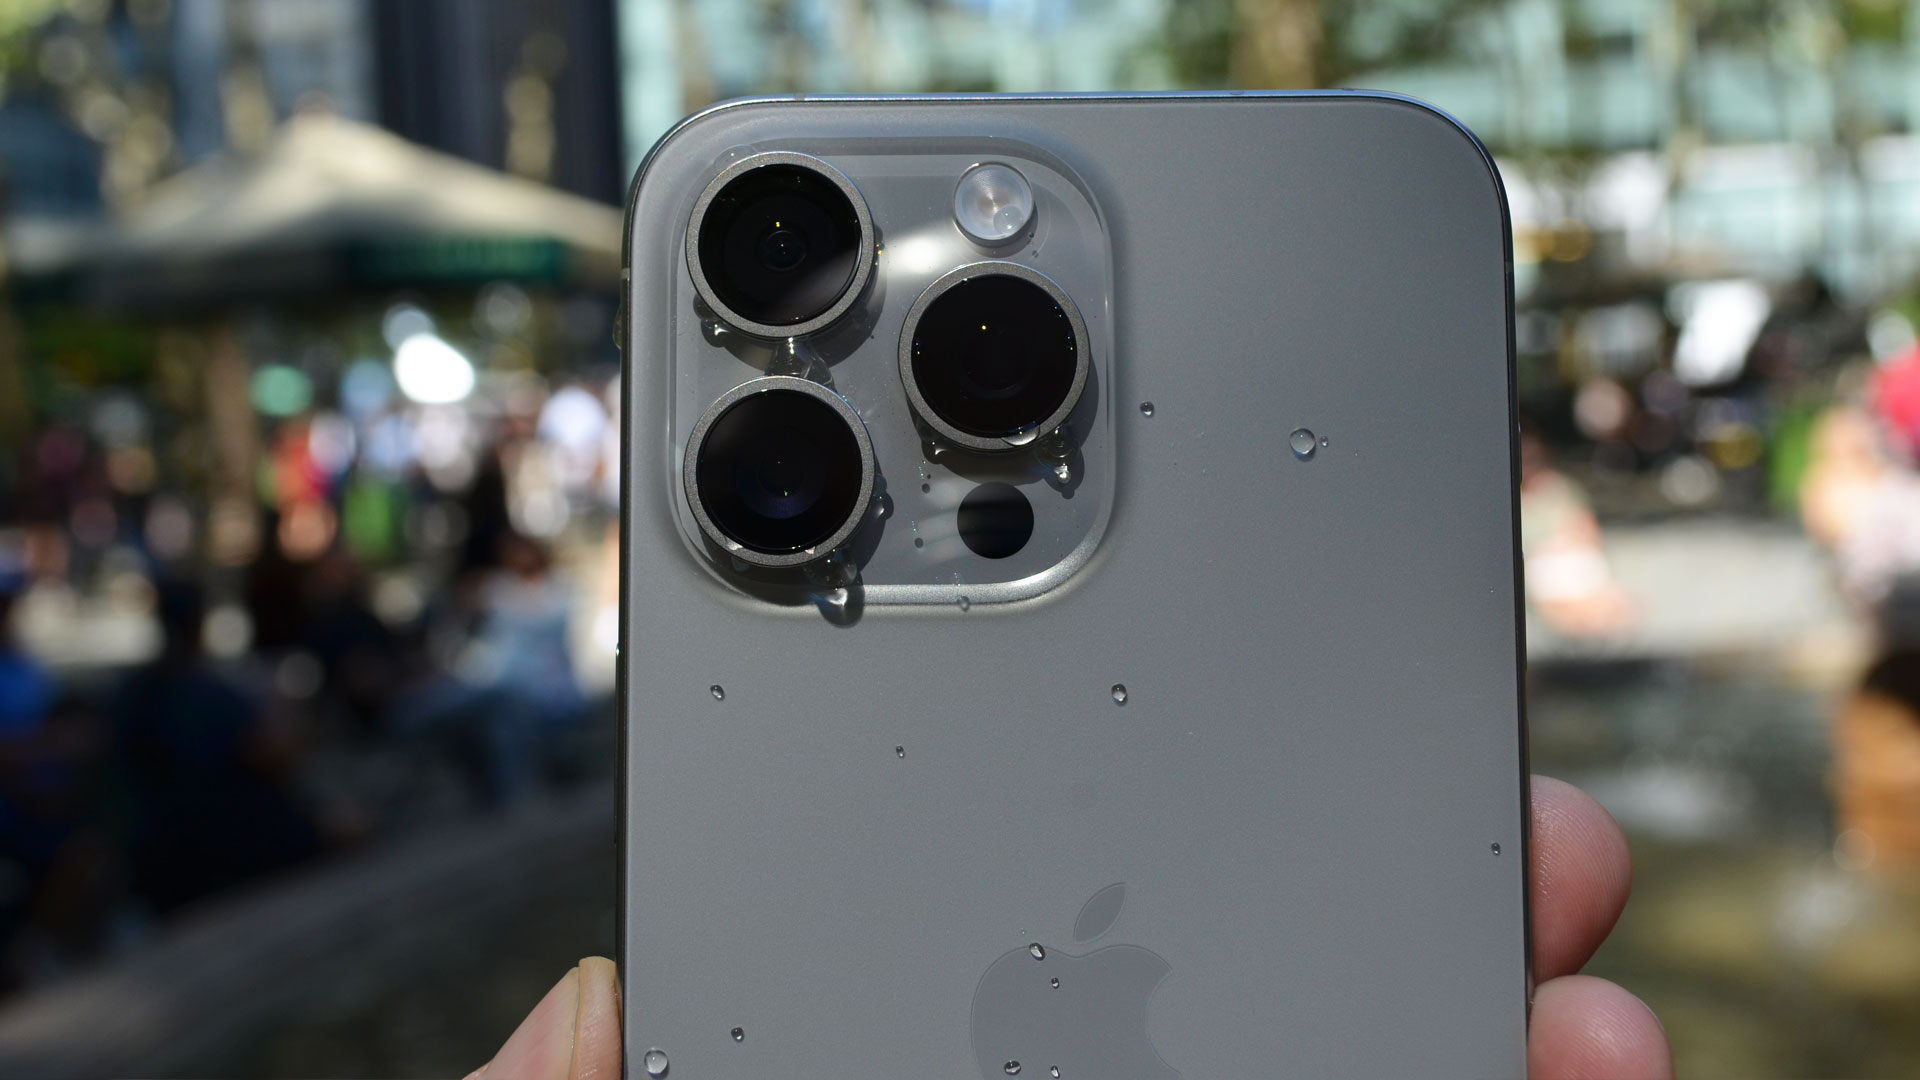 The iPhone 16 Pro Max might have an impressive zoom camera but at a